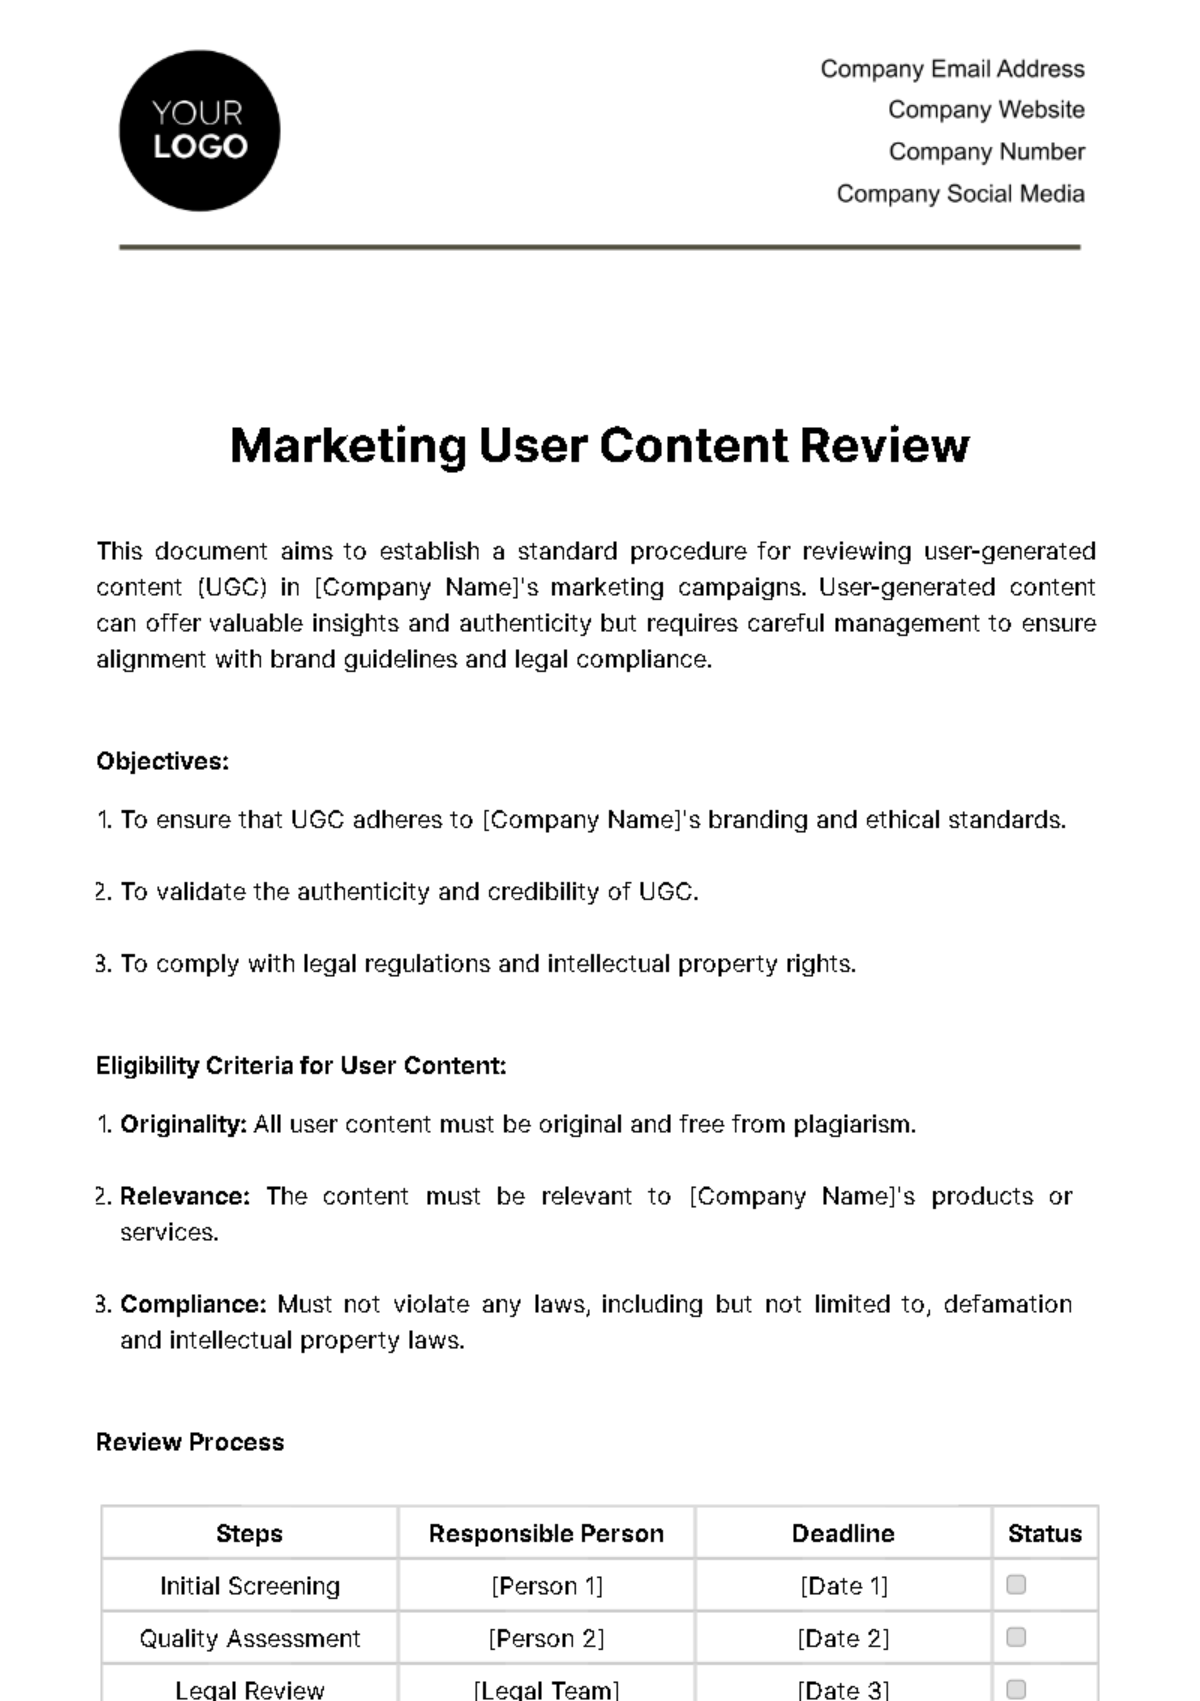 Free Marketing User Content Review Template